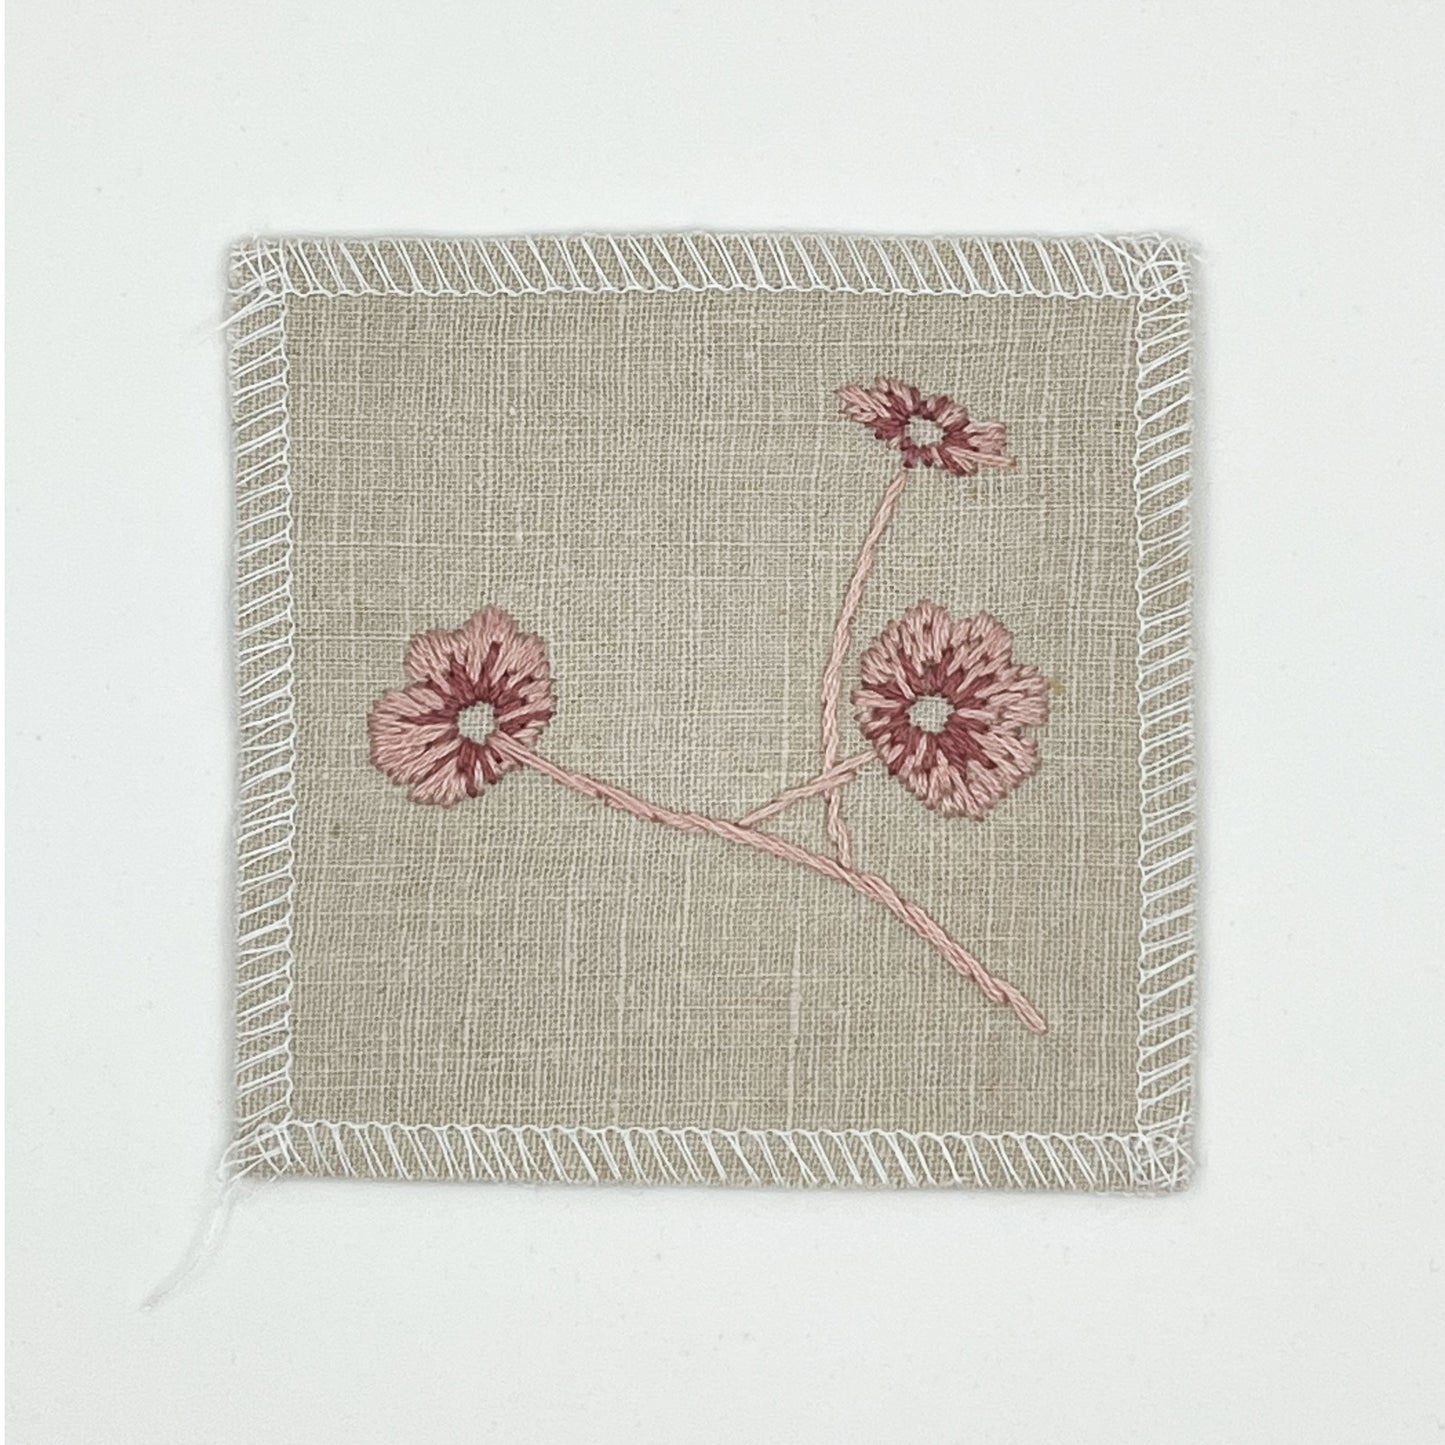 a natural colored square patch, hand embroidered with three poppies on a stem, in shades of pink, with overlocked edges, on a white background